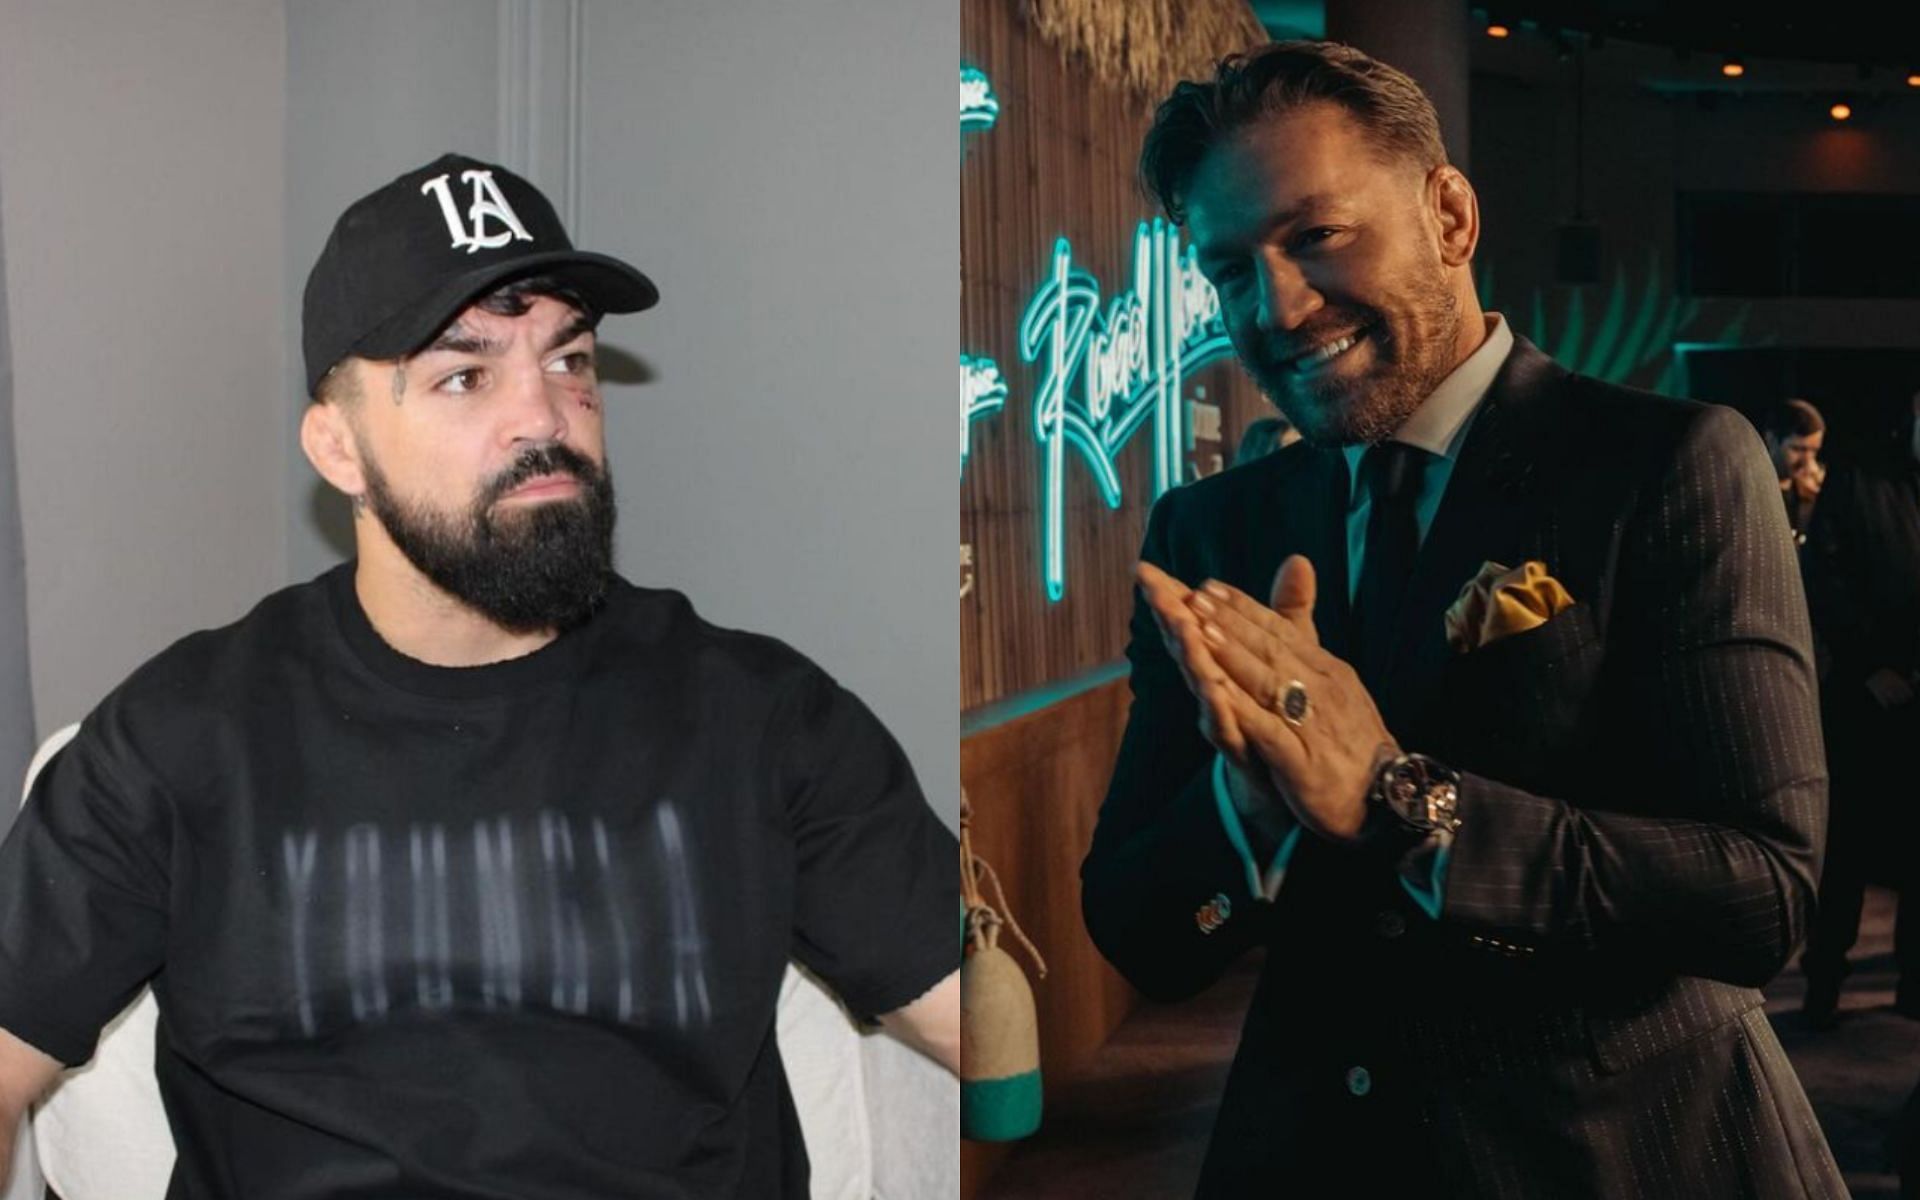 Mike Perry (left) claims to be a part owner of BKFC with Conor McGregor (right) [Photo Courtesy @platinummikeperry and @thenotoriousmma on Instagram]